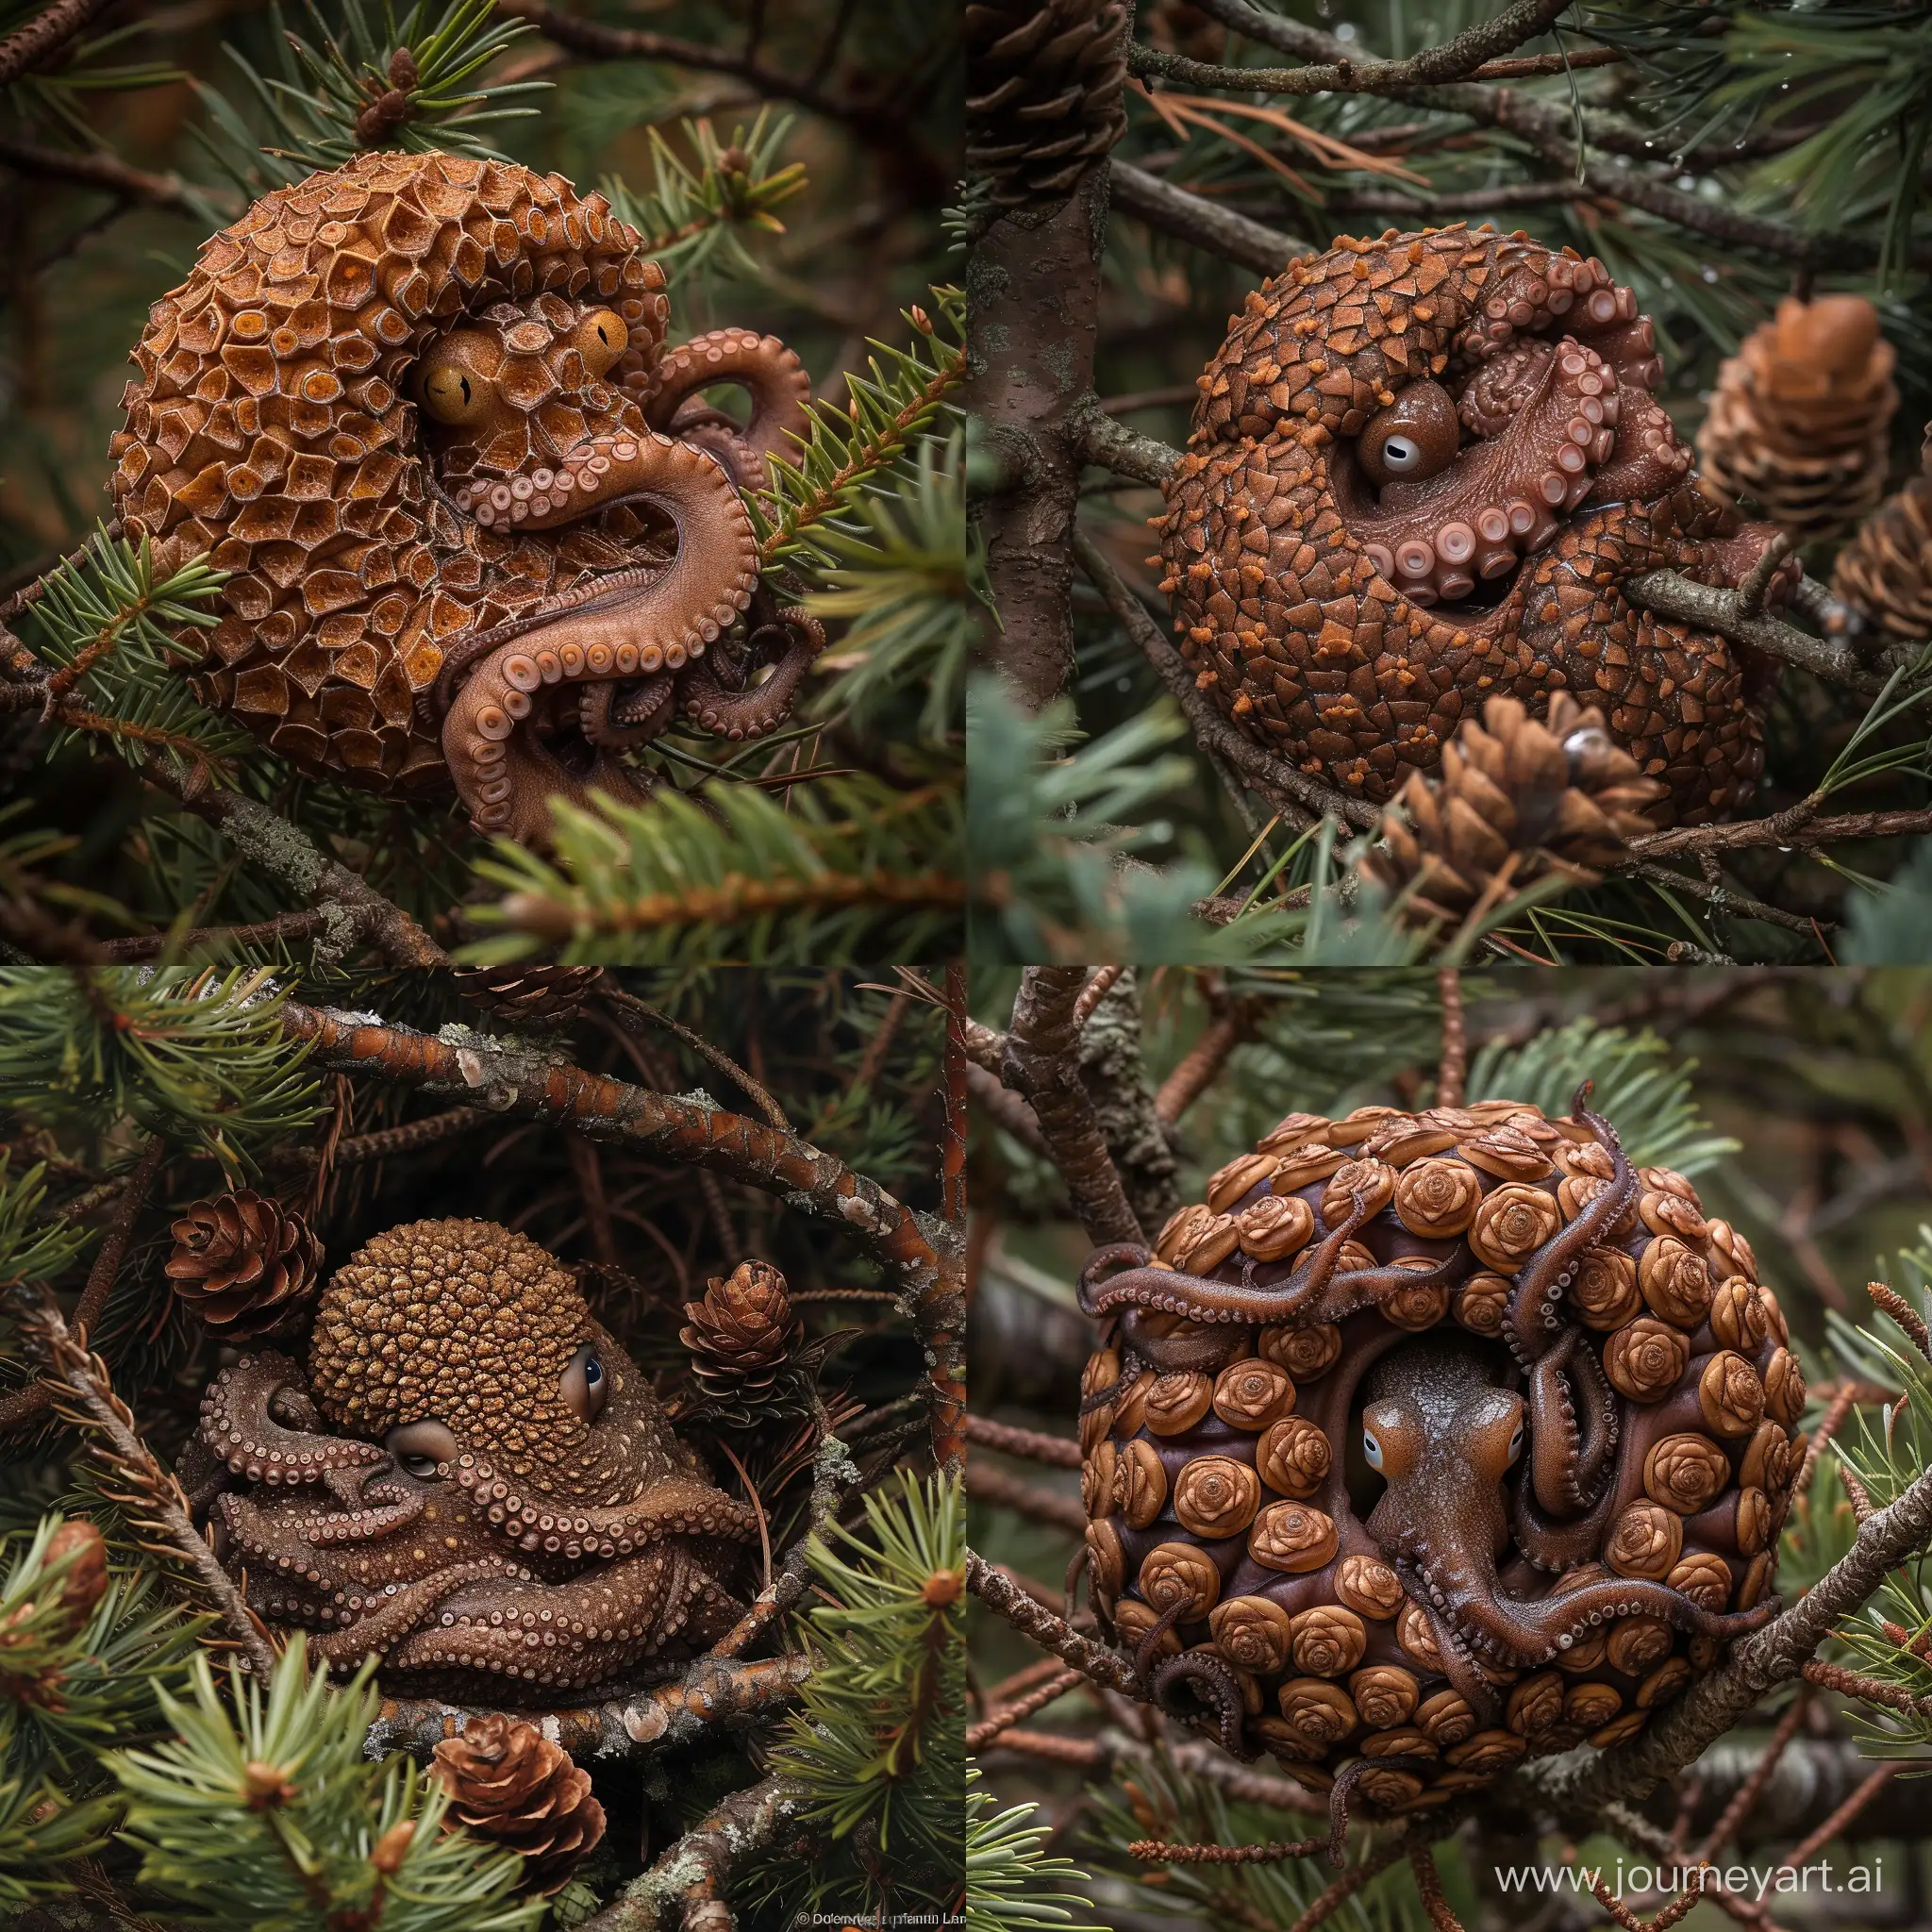 detailed crisp sharp award winning wildlife photo of a small wet mottled brown octopus completely covered in overlapping pinecone scales, pinecone scales covering the entire body and tentacles, curled up hiding in a pine tree, it looks exactly like a pinecone, only the eyes are visible, suckers are not visible, dense foliage with pinecones, temperate pine rainforest, bright daylight, telephoto lens, canon camera, wide shot with branches and context, good composition, Frans Lanting